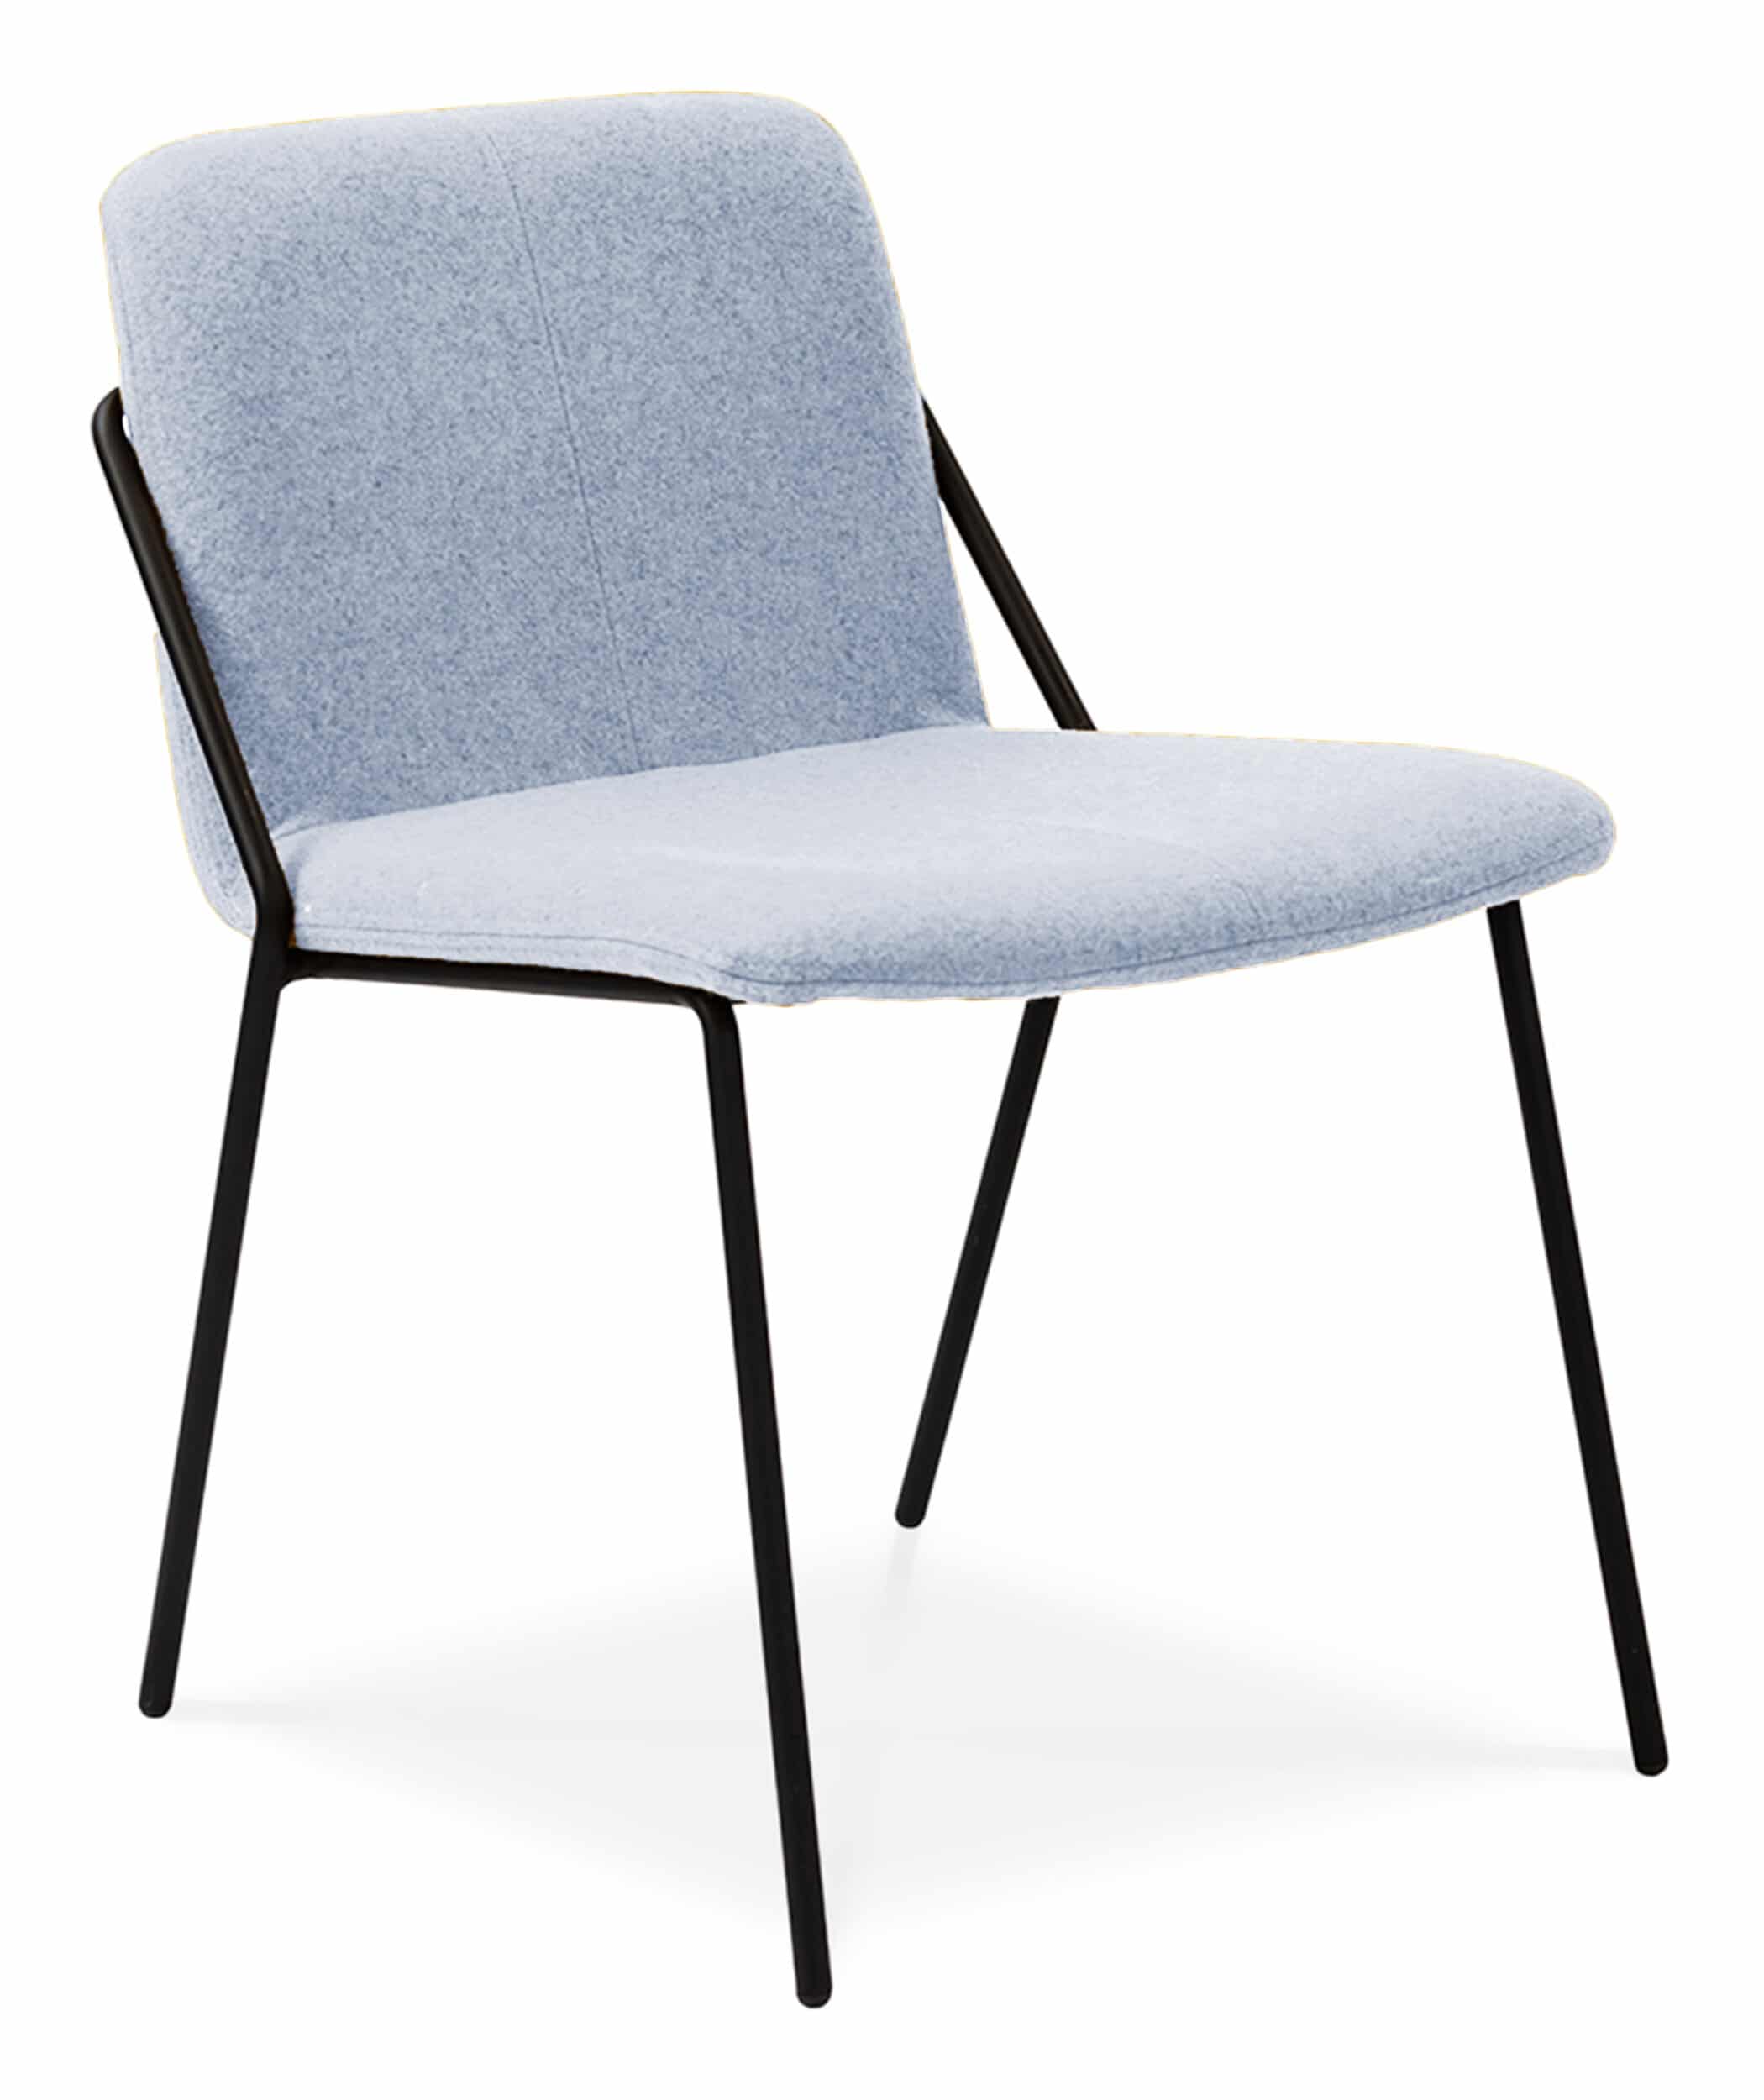 WS - Sling Side chair - ERA CSE39 YOUTH